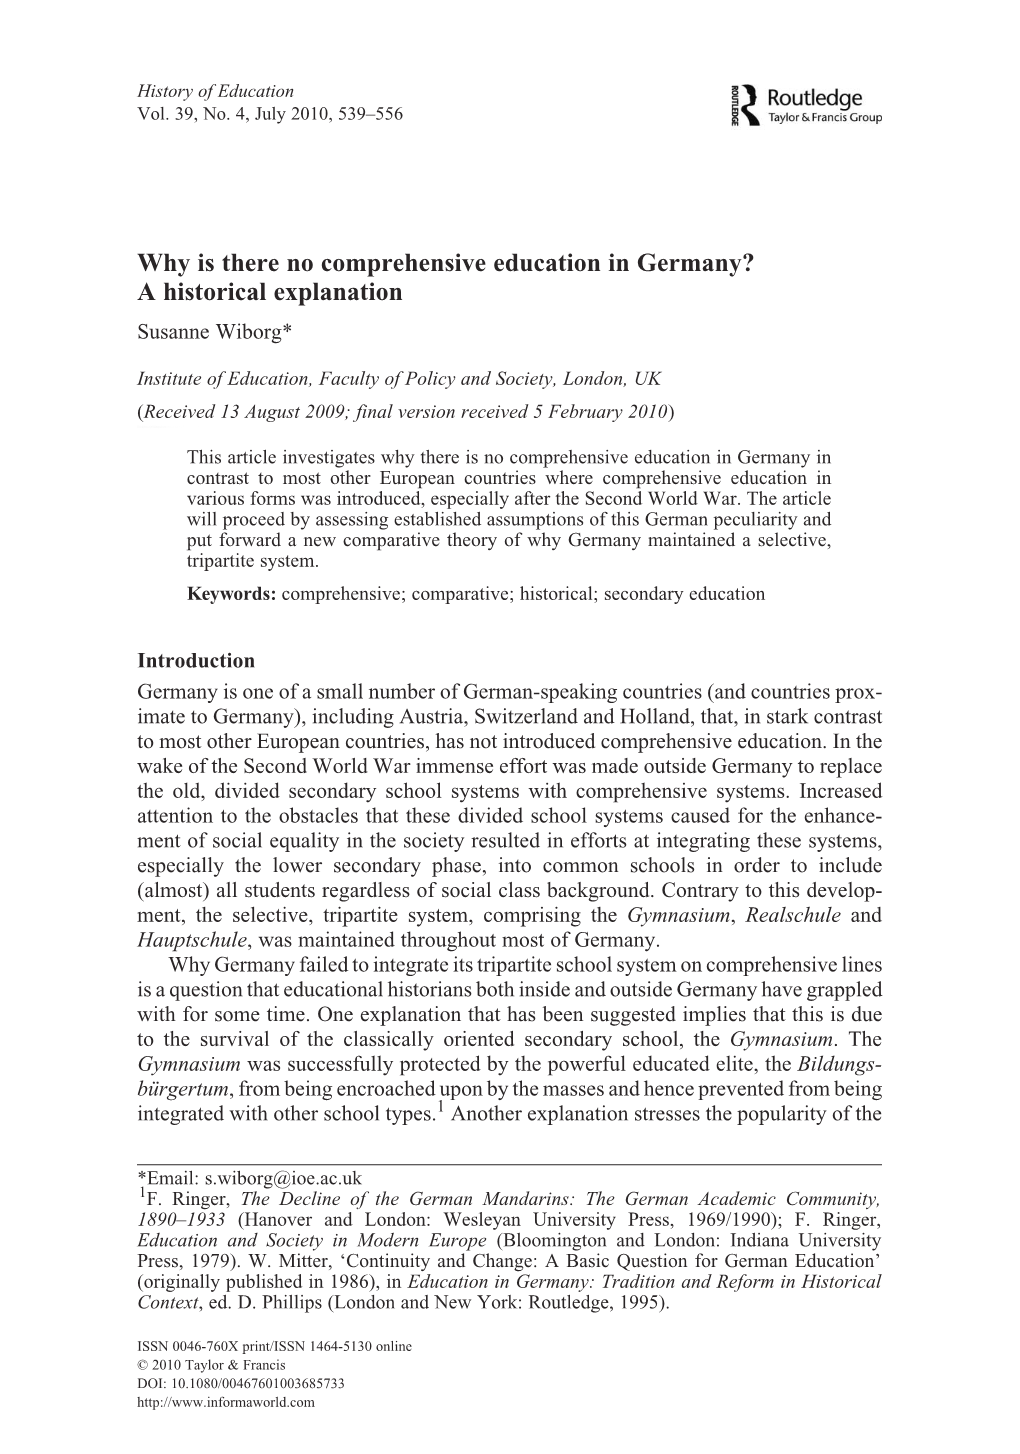 Why Is There No Comprehensive Education in Germany? a Historical Explanation Susanne Wiborg*